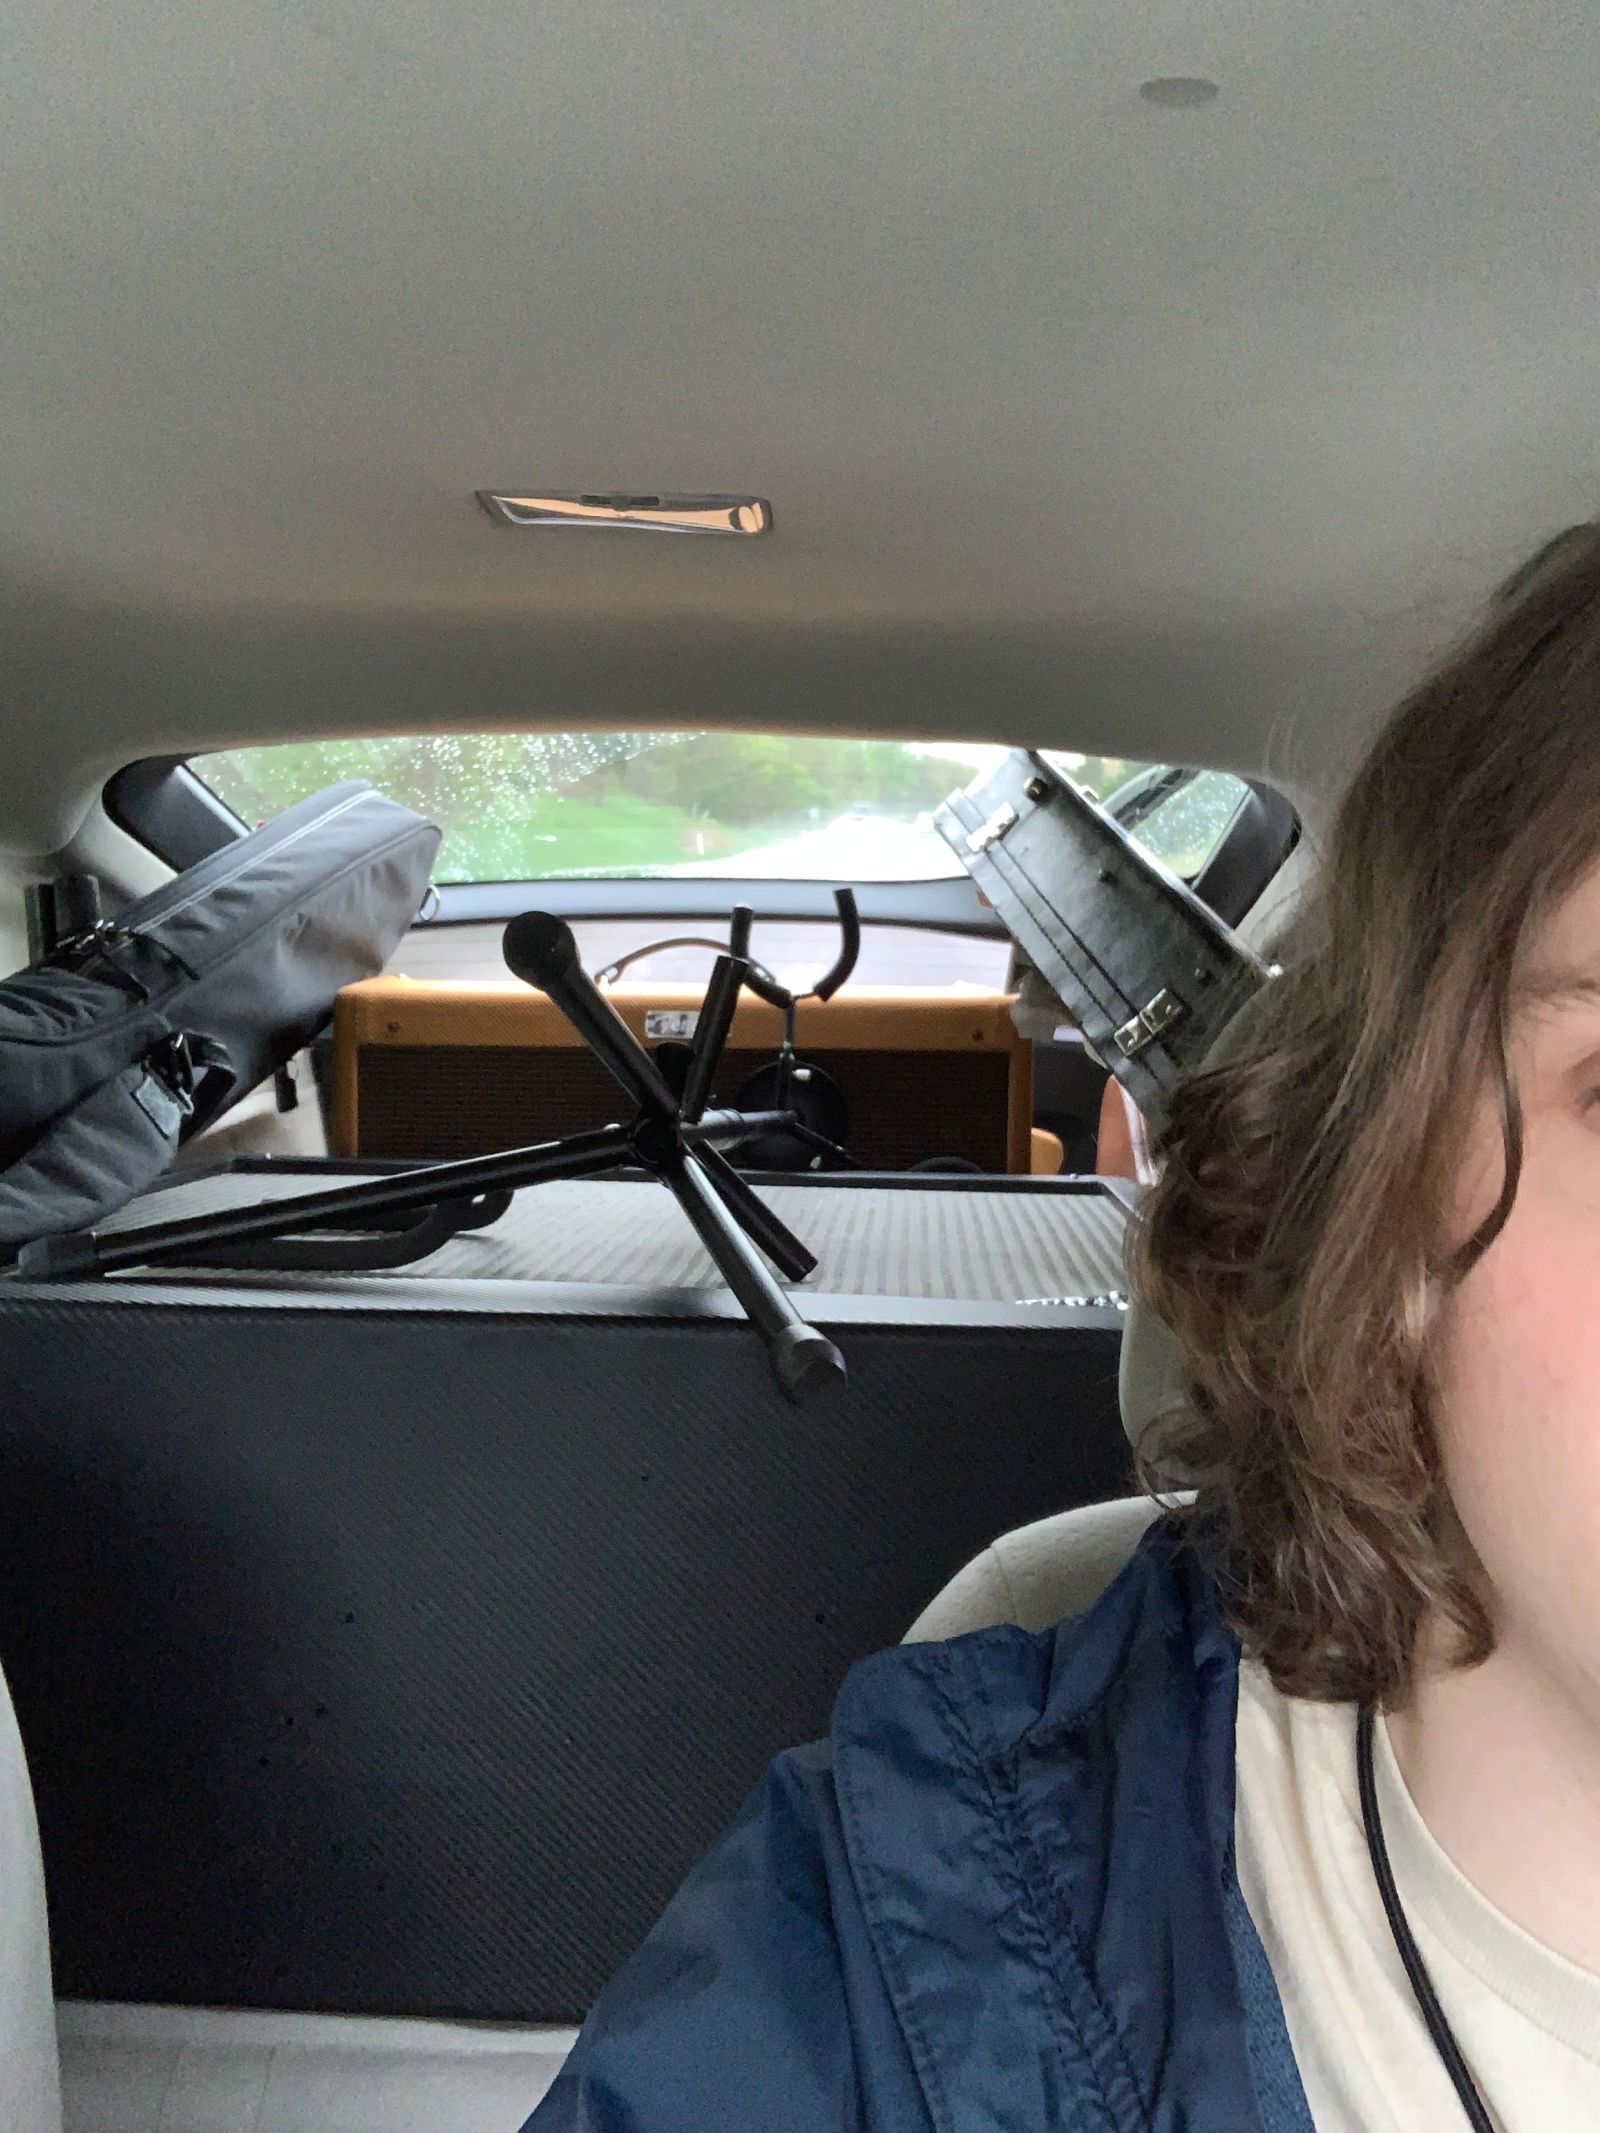 Two guitars, a bass, a Fender Deluxe Amp, and a bass cabinet in the back of the Prius.